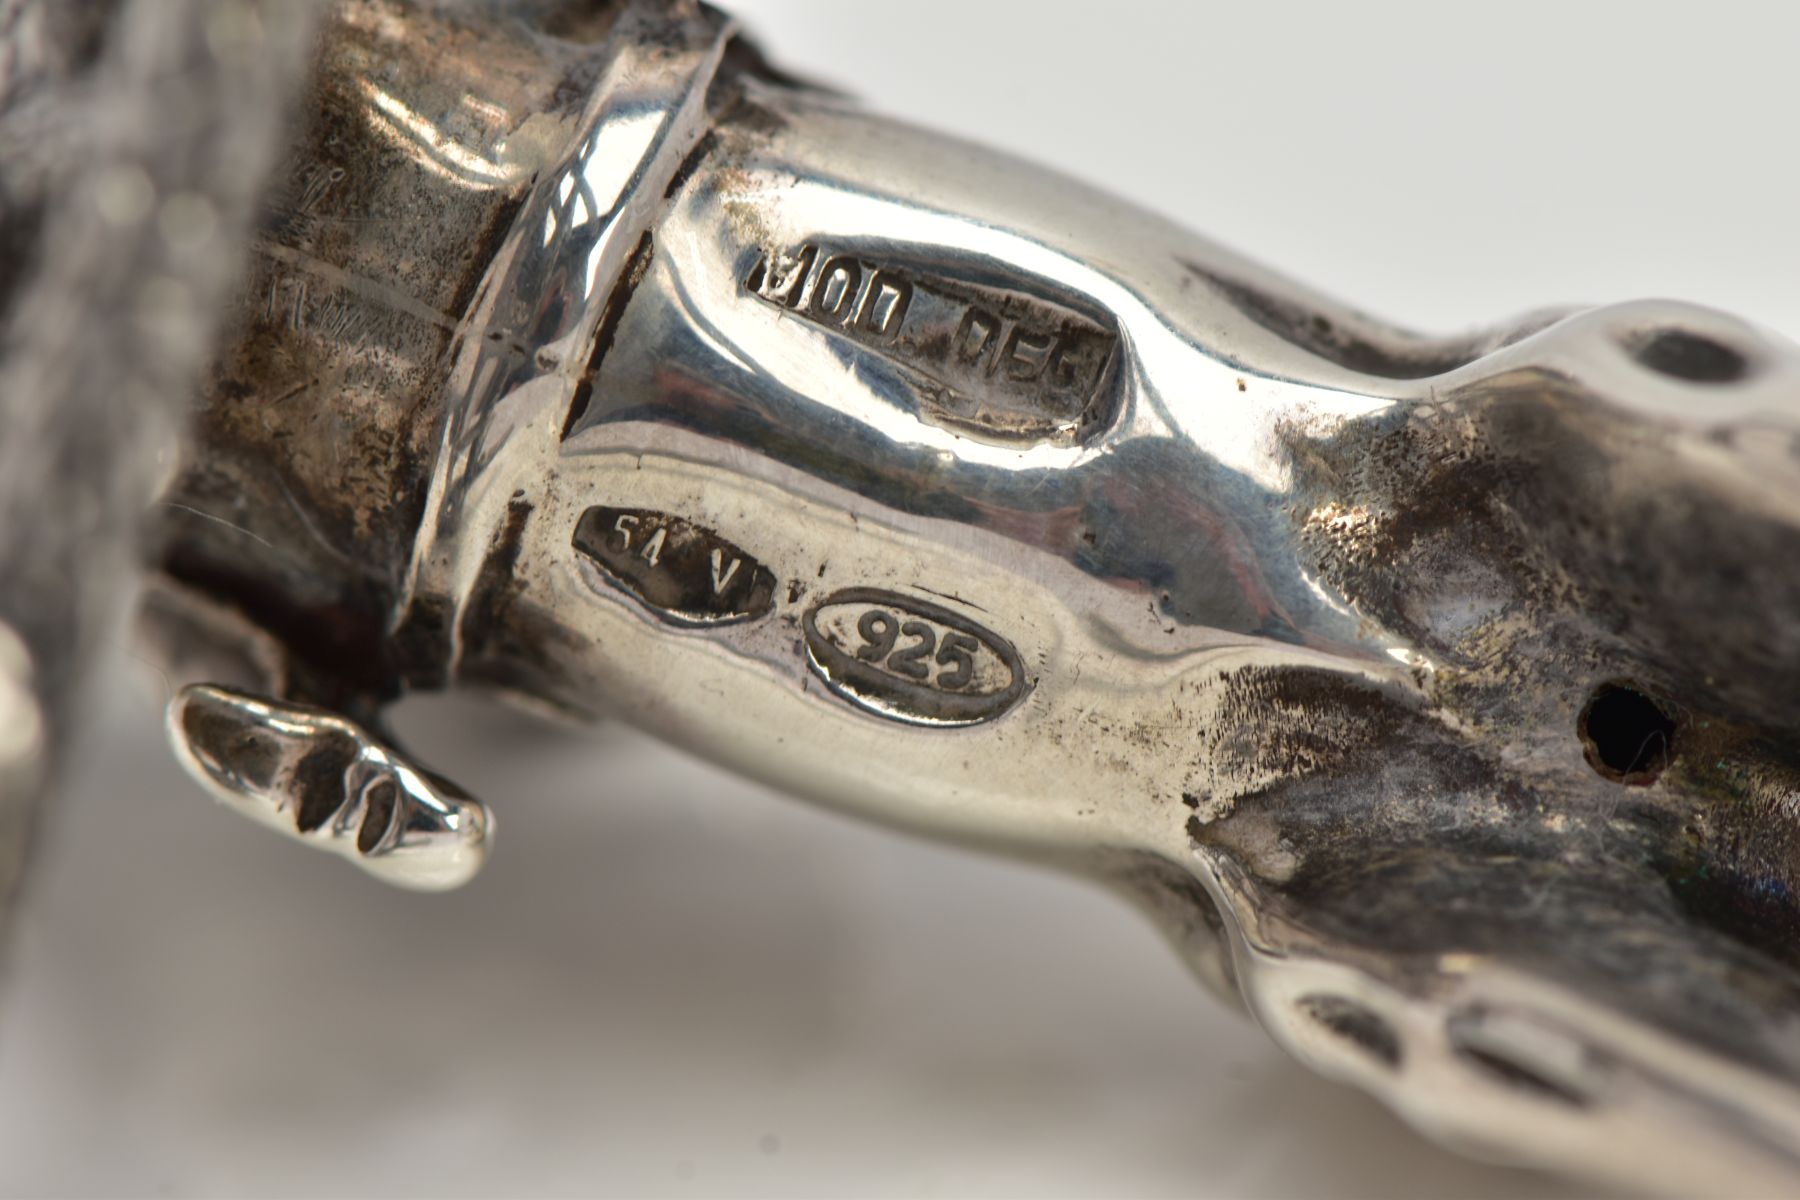 A SILVER SMALL HORSE AND JOCKEY ORNAMENT, measuring approximately 50mm in length x 70mm in height, - Image 7 of 7